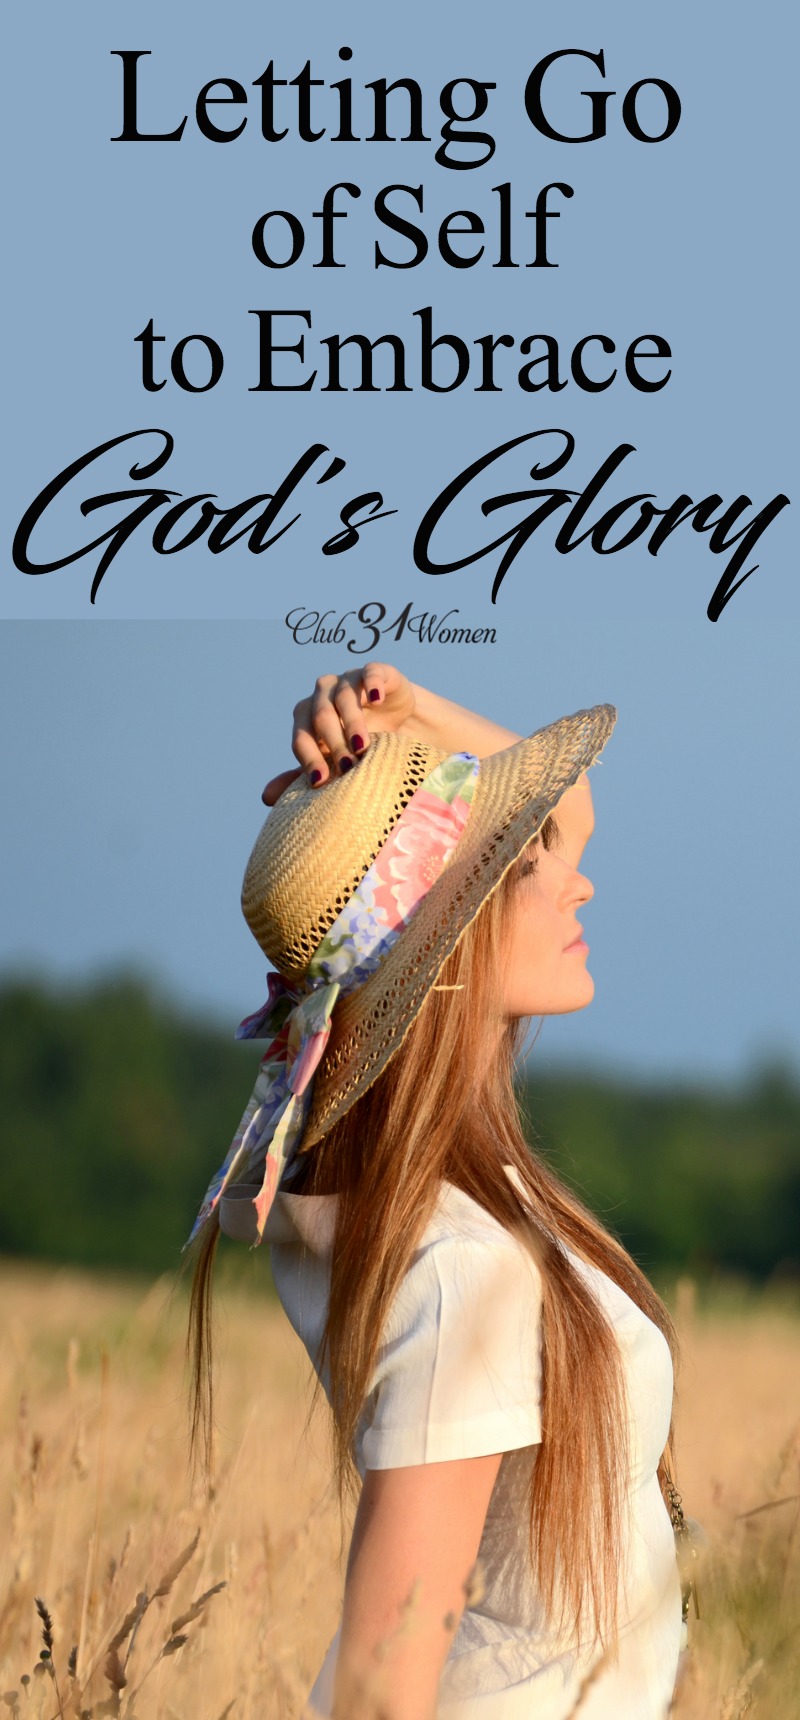 It's not about us. When we learn to let go of our self and see God's glory, we lose ourselves in Him and the story He's writing for us. via @Club31Women